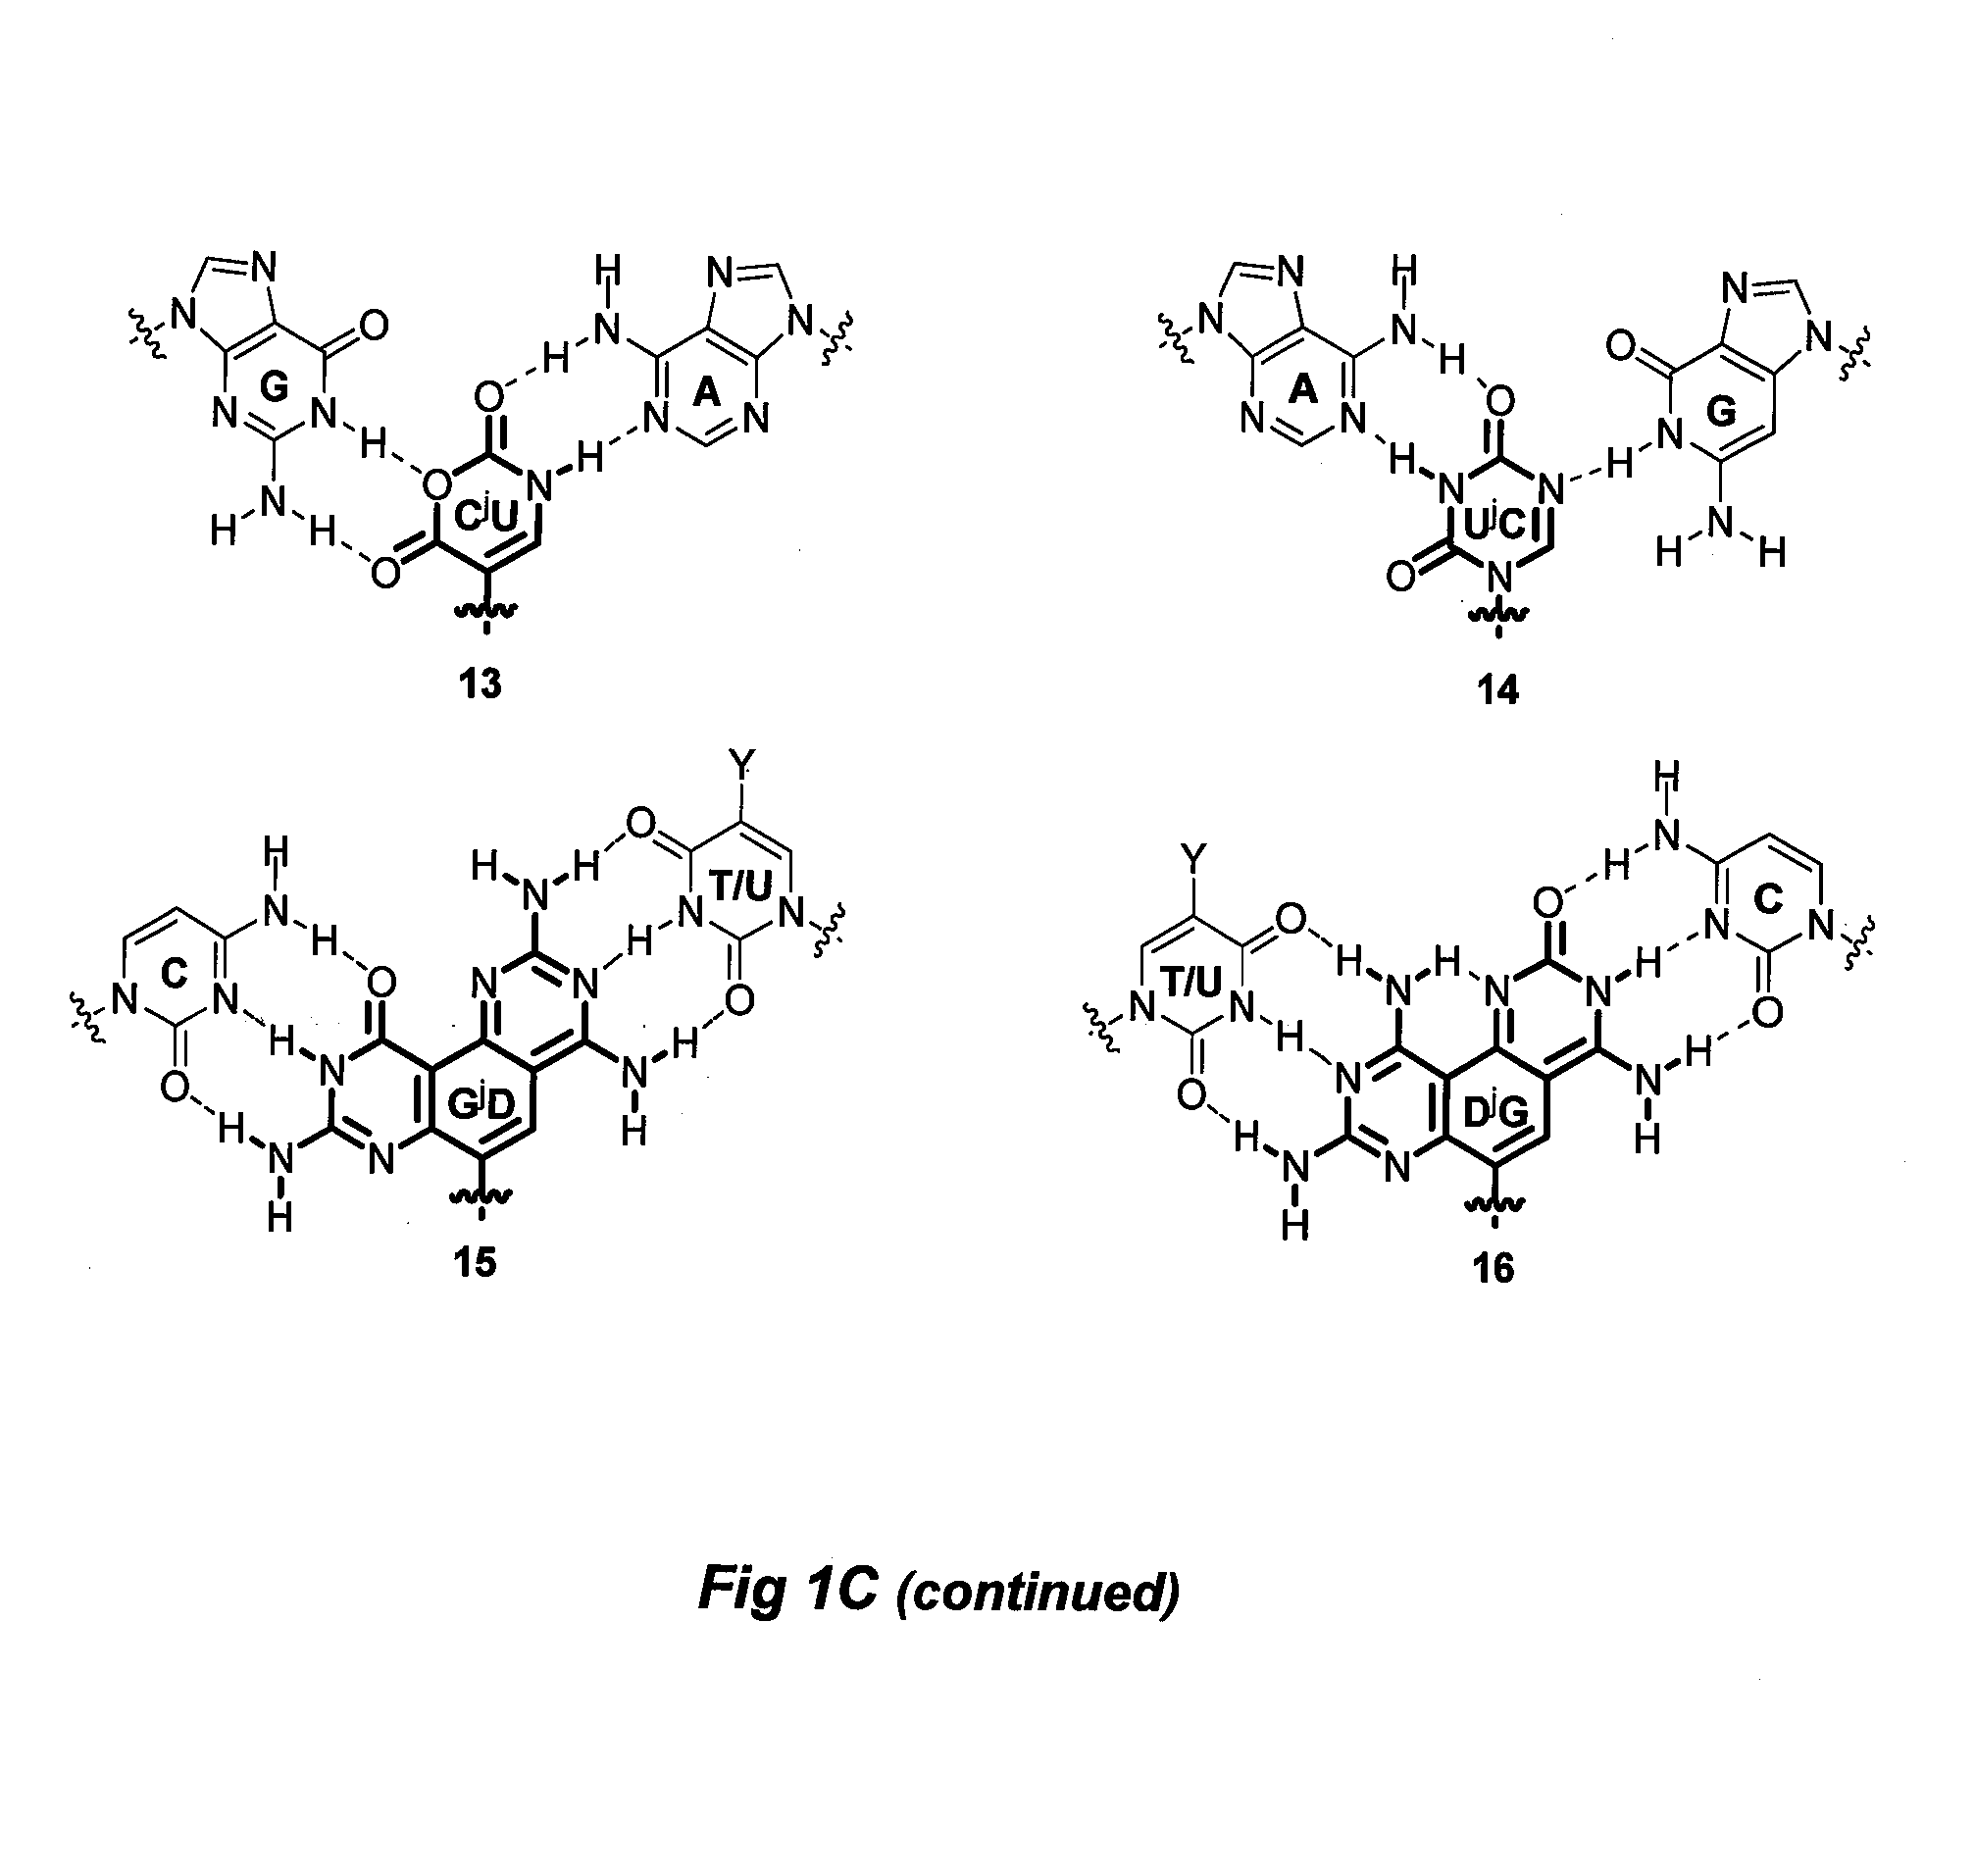 Divalent nucleobase compounds and uses therefor